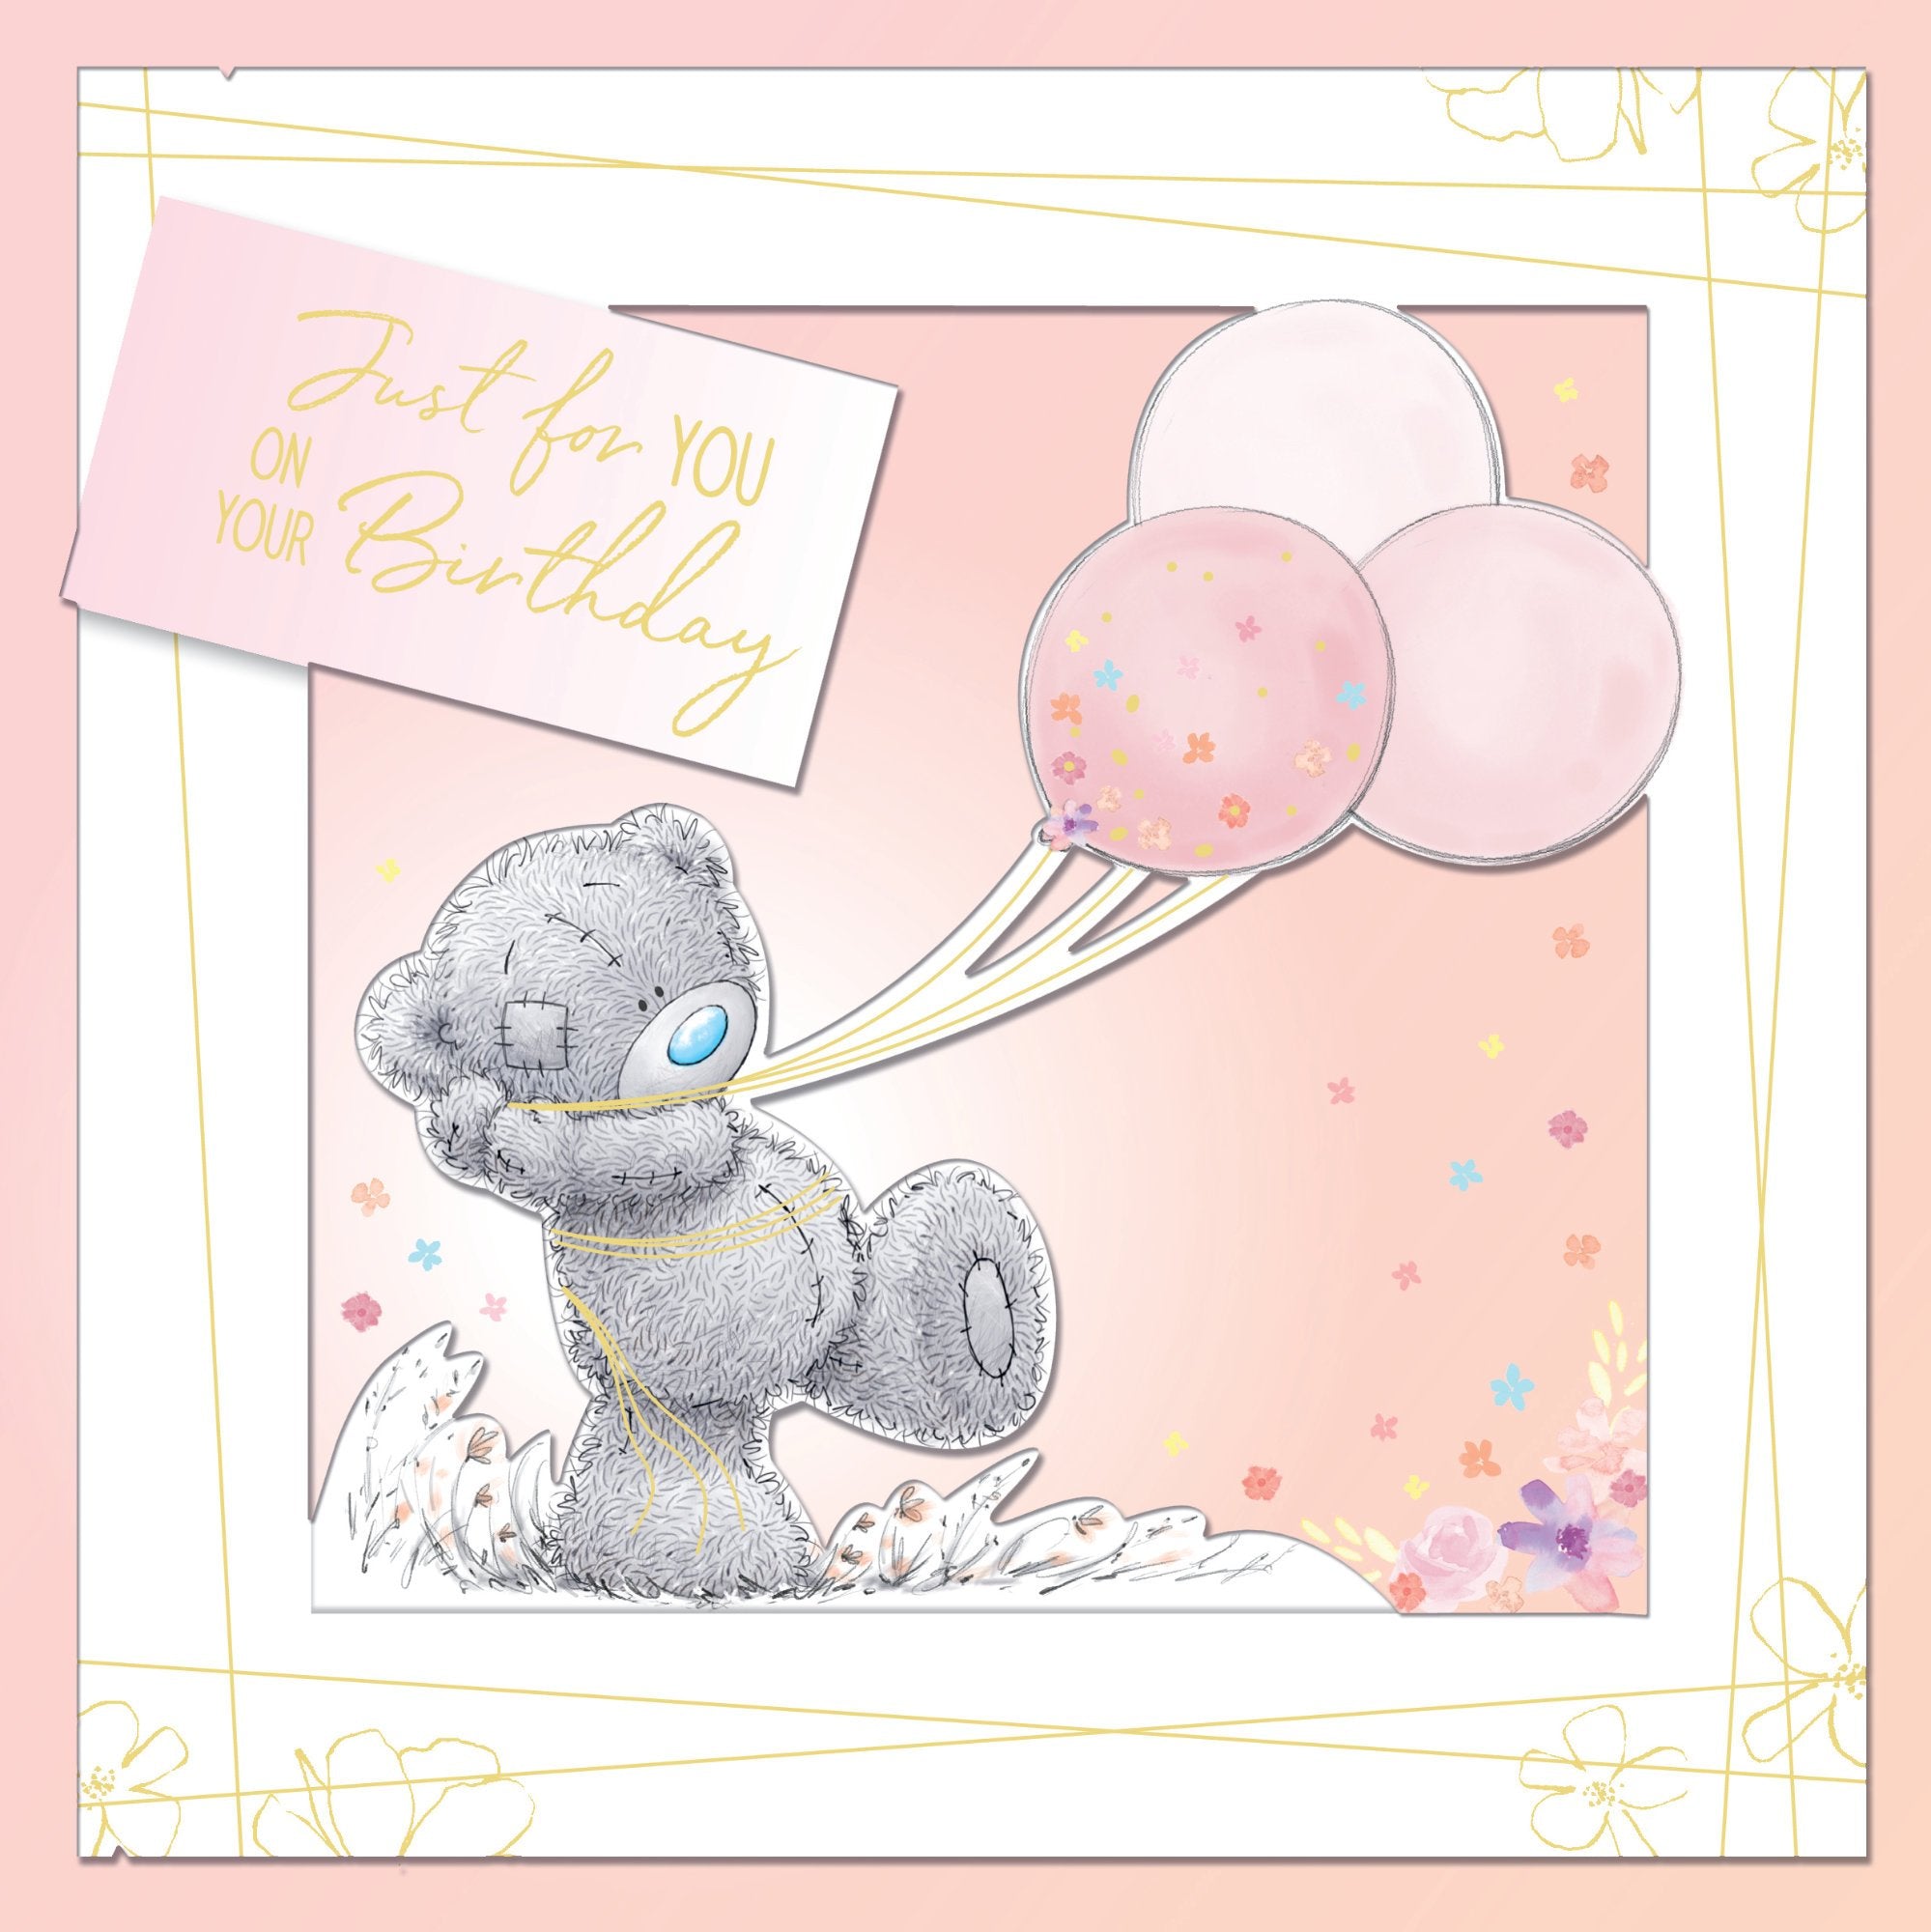 Photograph of Bear Holding Balloons Greetings Card at Nicole's Shop